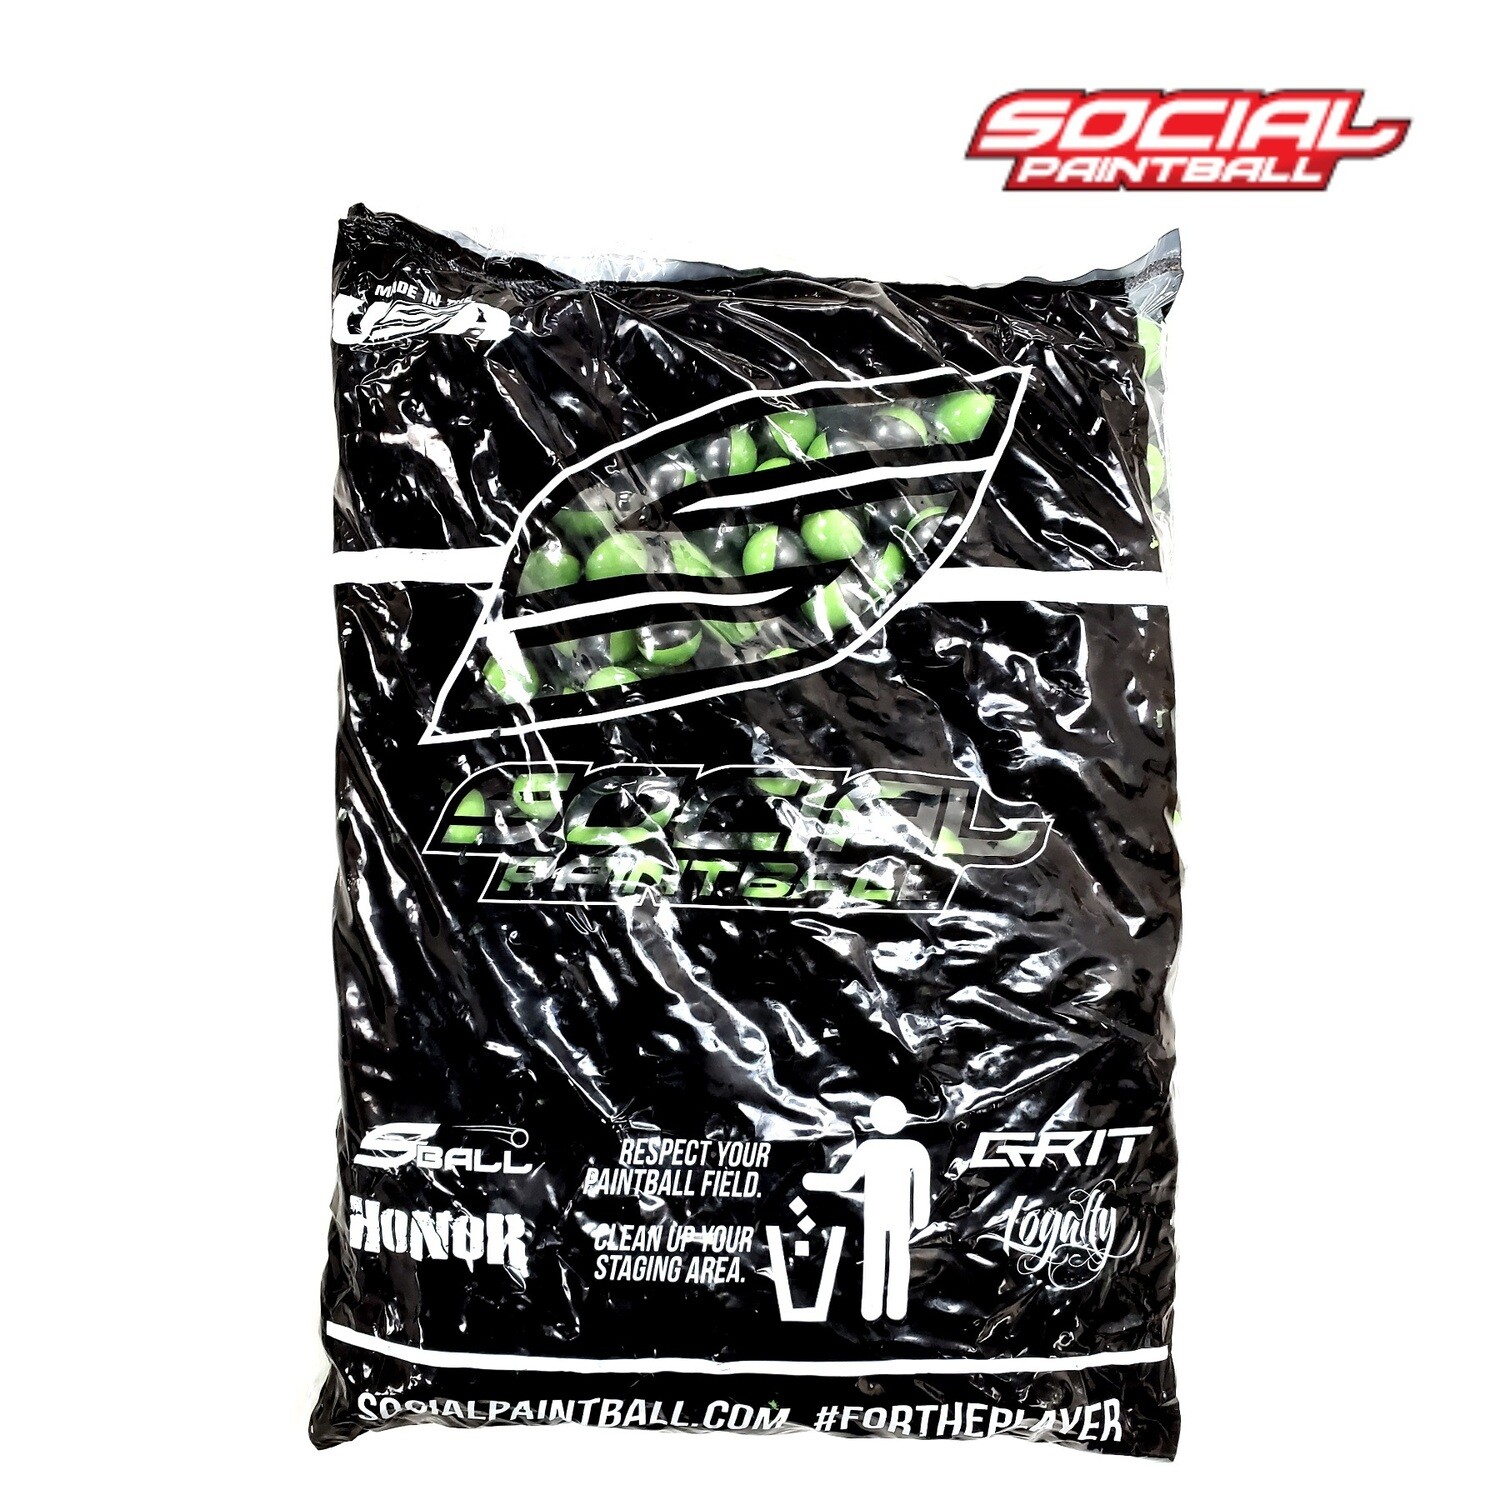 Social Grit Paintballs - 500 Rounds - .68 caliber - Silver/Green Shell - Lime Green Fill